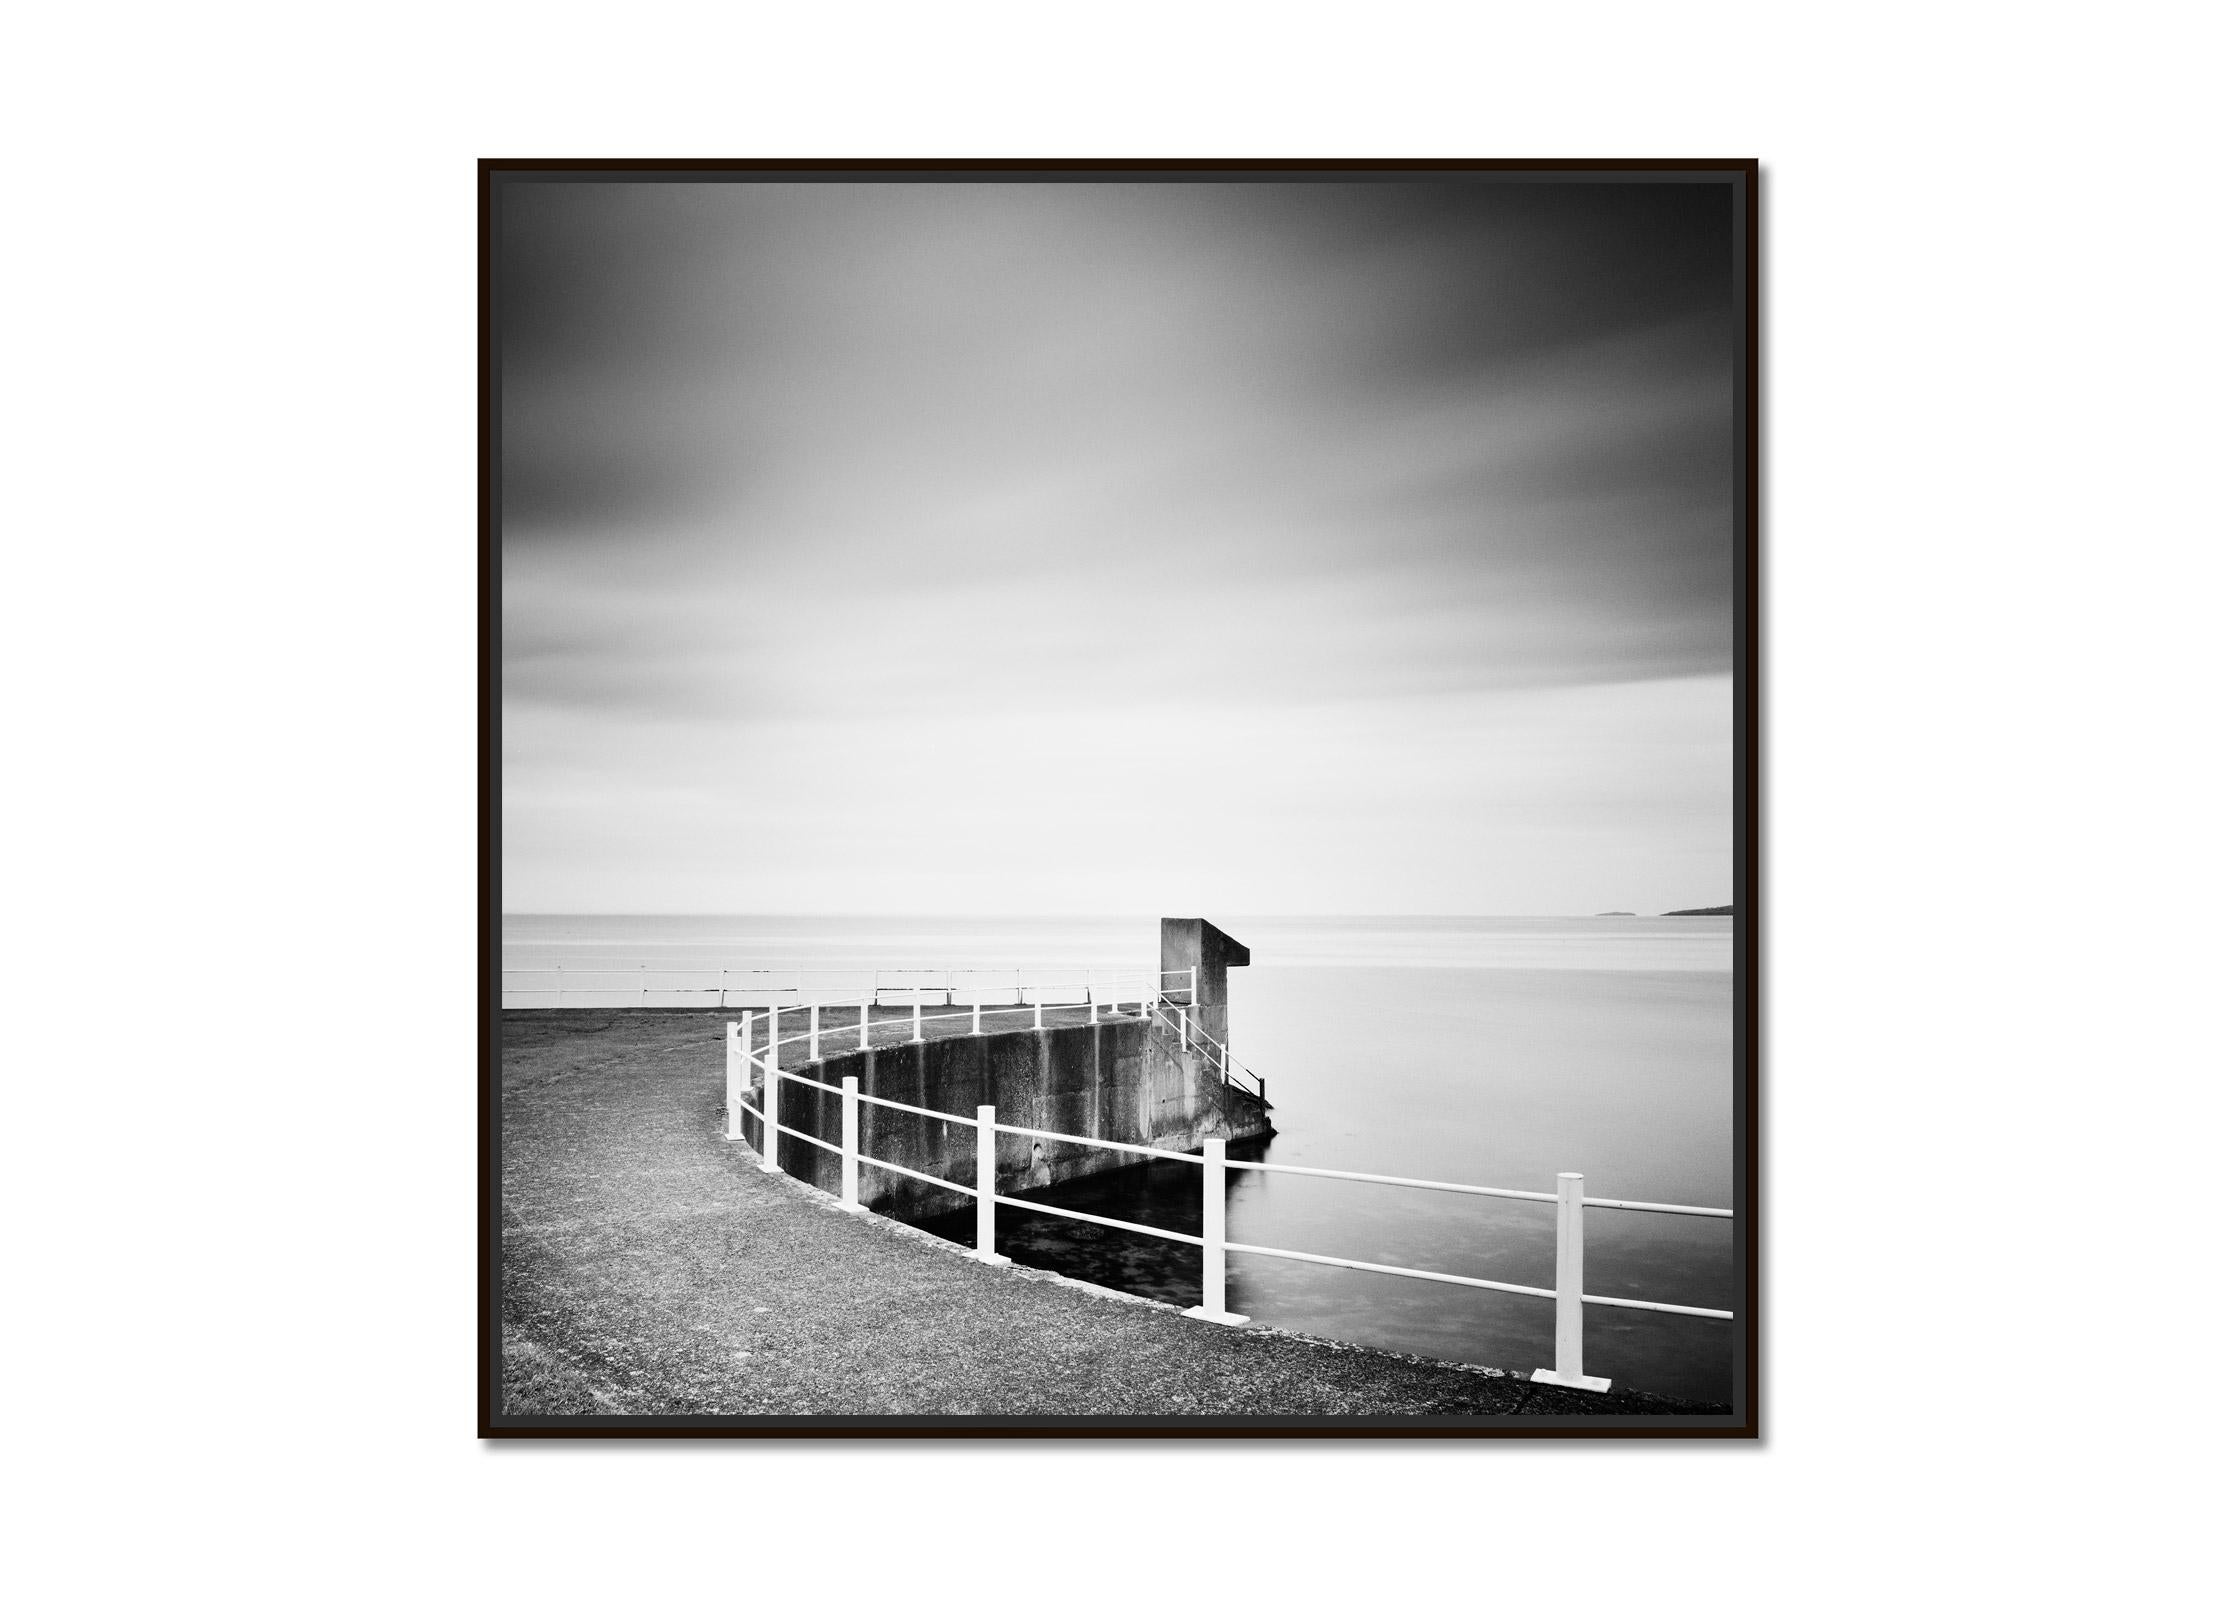 Seaside, Promenade, Ireland, black and white waterscape landscape photography - Photograph by Gerald Berghammer